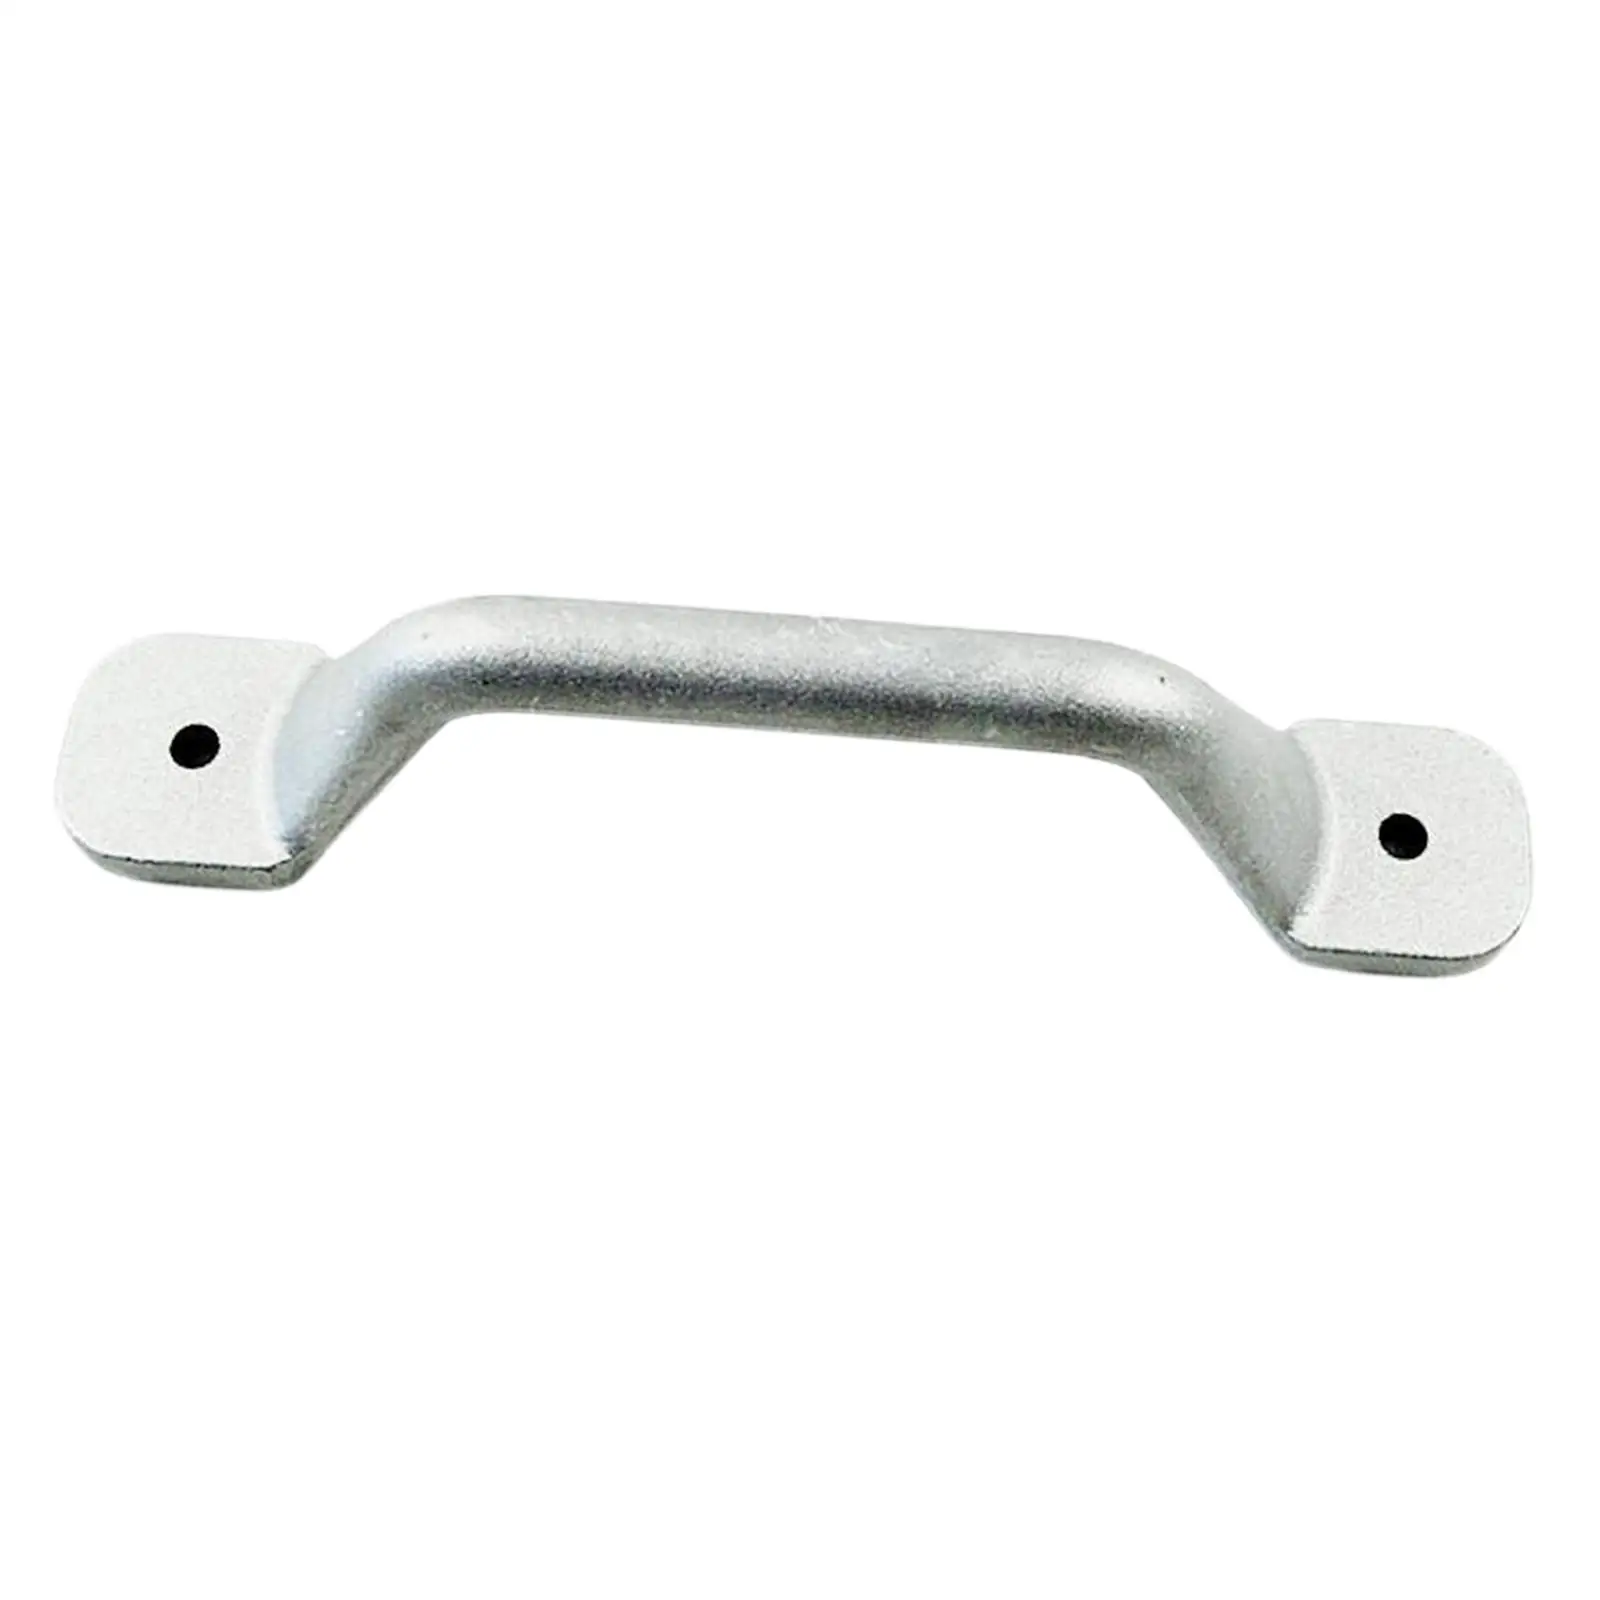 Aluminum Grab Handle-Entry Bar Replaces for RV , Trailer, Boat